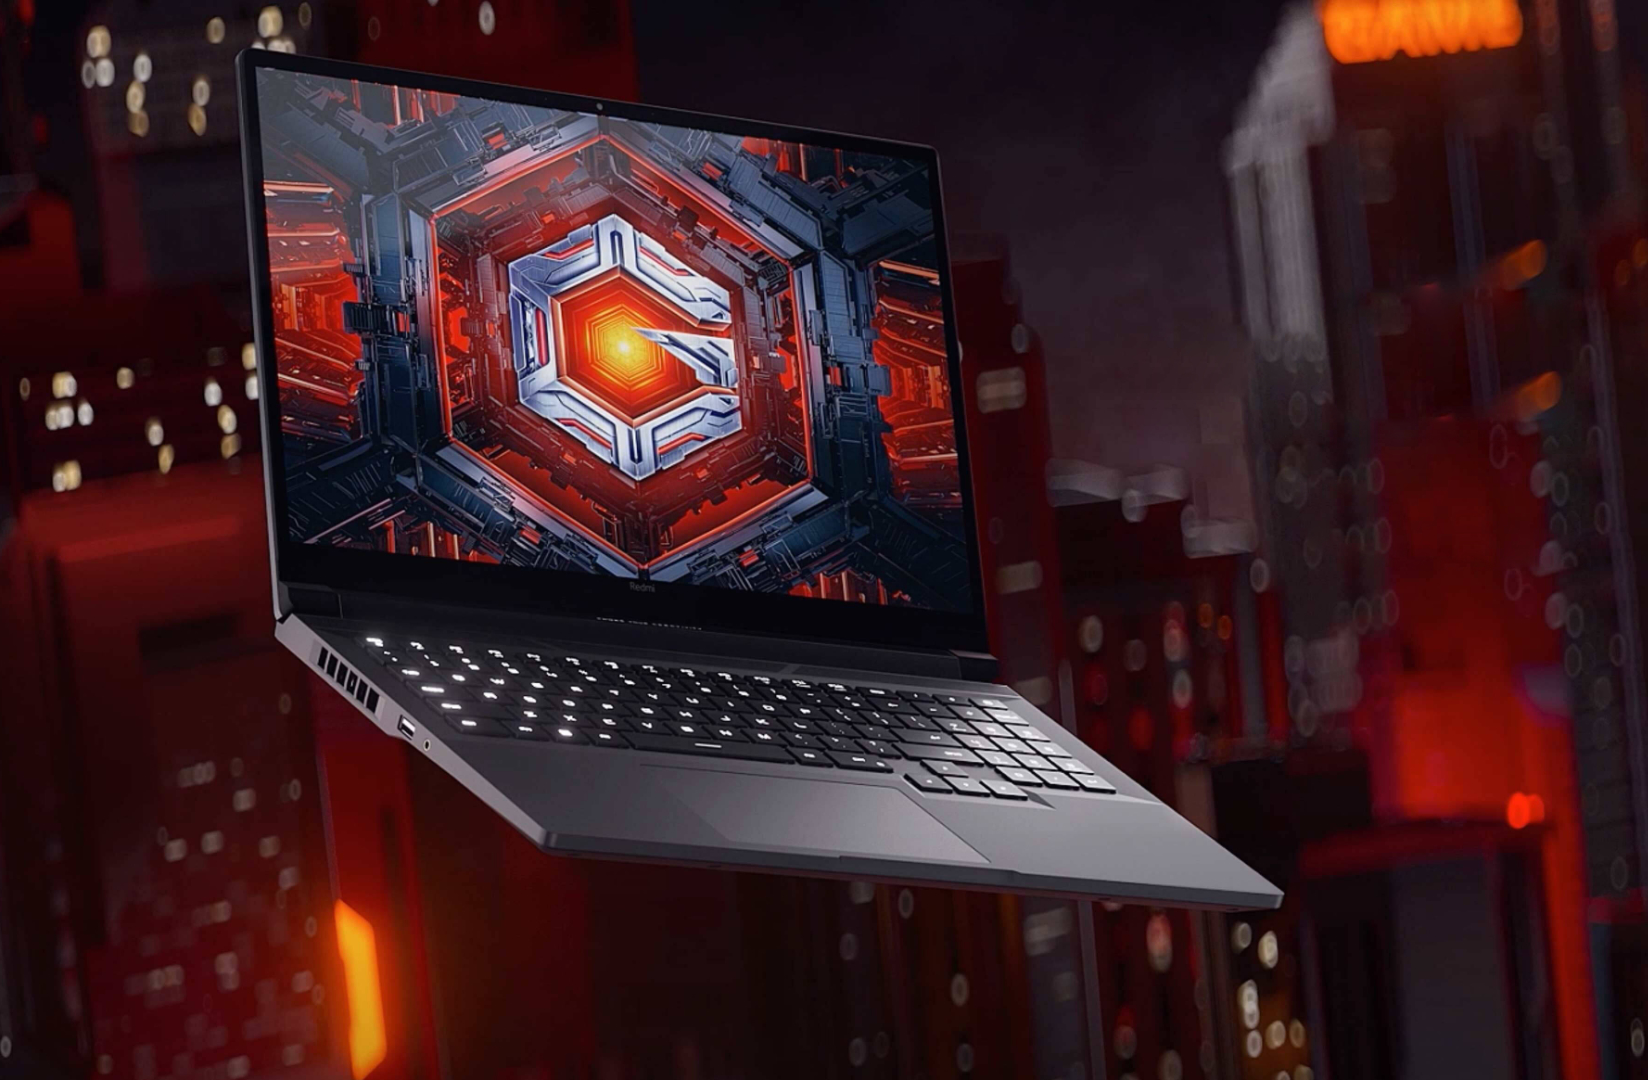 Xiaomi Redmi G Pro 2024 shows itself as new gaming laptop with unreleased  Intel processor and NVIDIA GeForce RTX GPU - NotebookCheck.net News